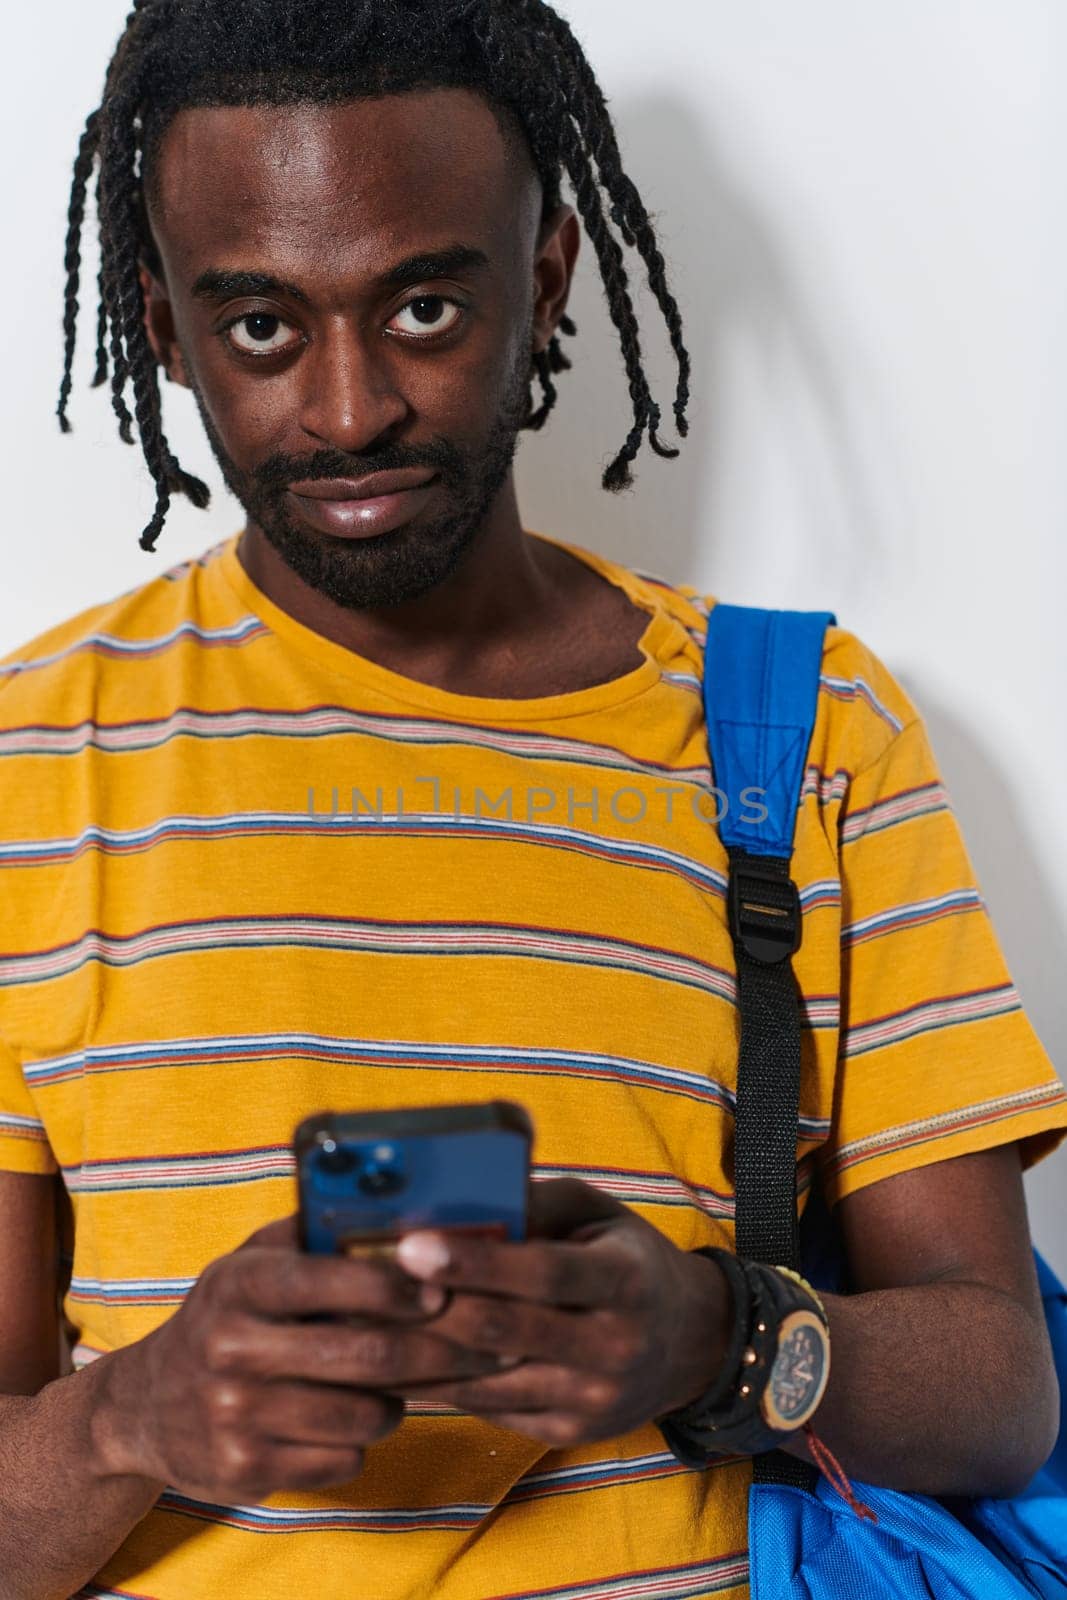 African American teenager engages with his smartphone against a pristine white background, encapsulating the essence of contemporary digital connectivity and youth culture.